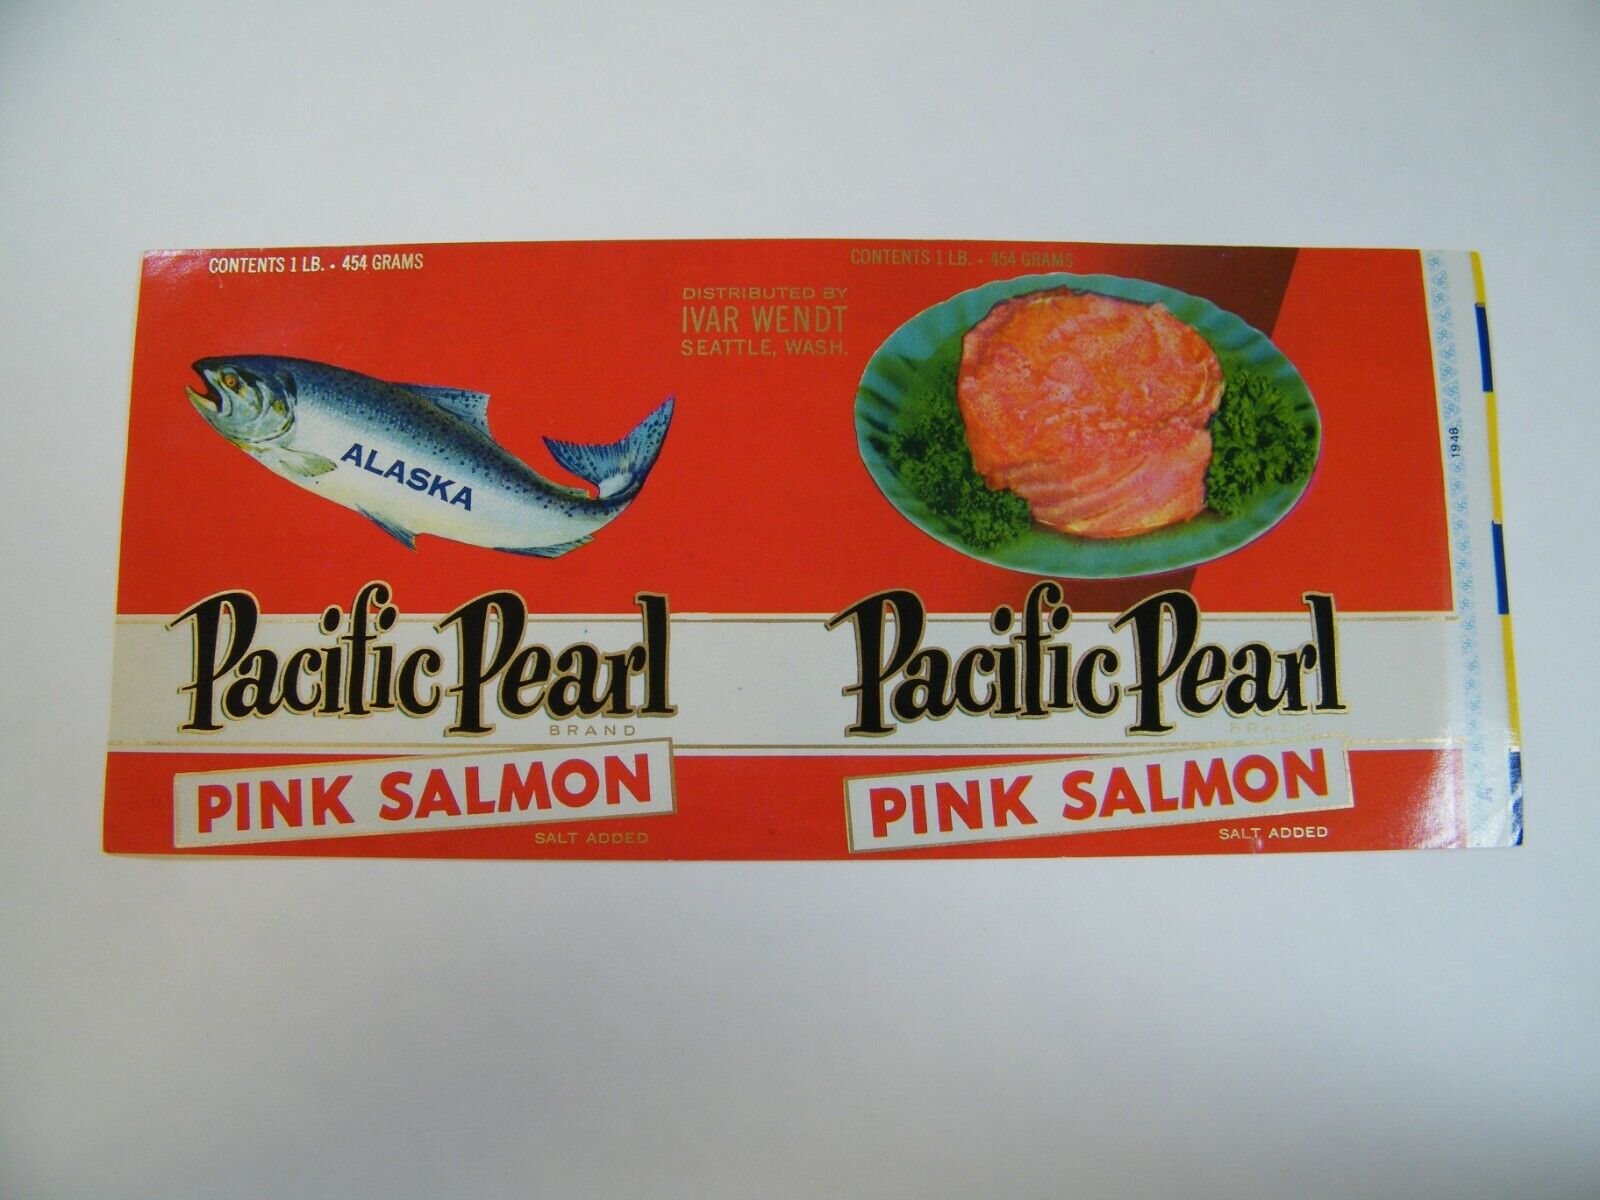 1948 PACIFIC PEARL PINK SALMON LABEL IVAR WENDT SEATTLE WA